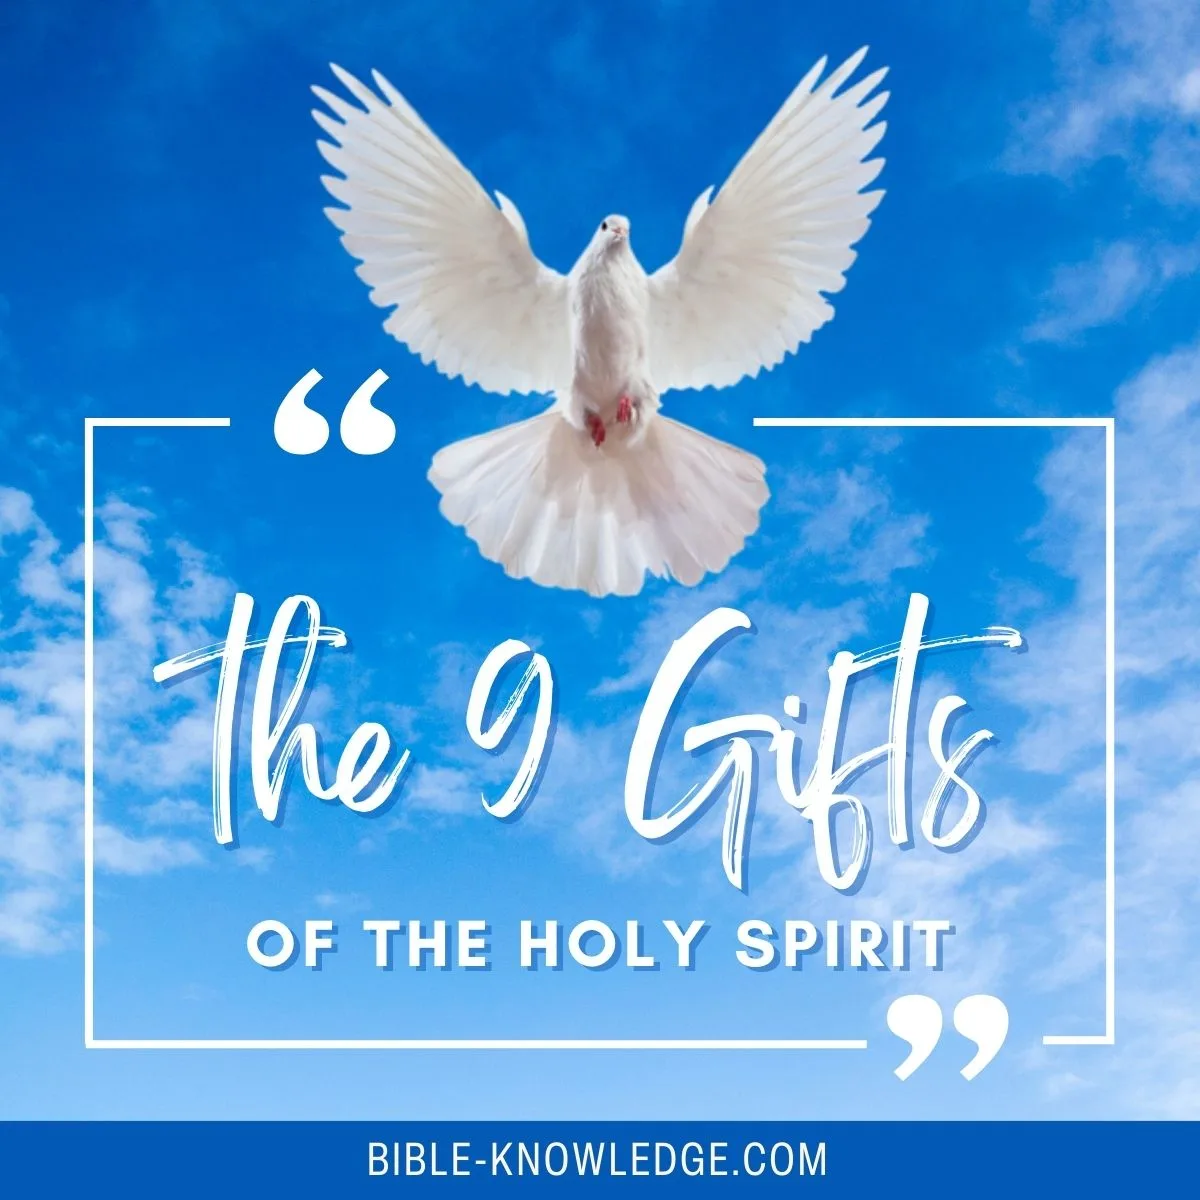 The 9 Gifts of the Holy Spirit